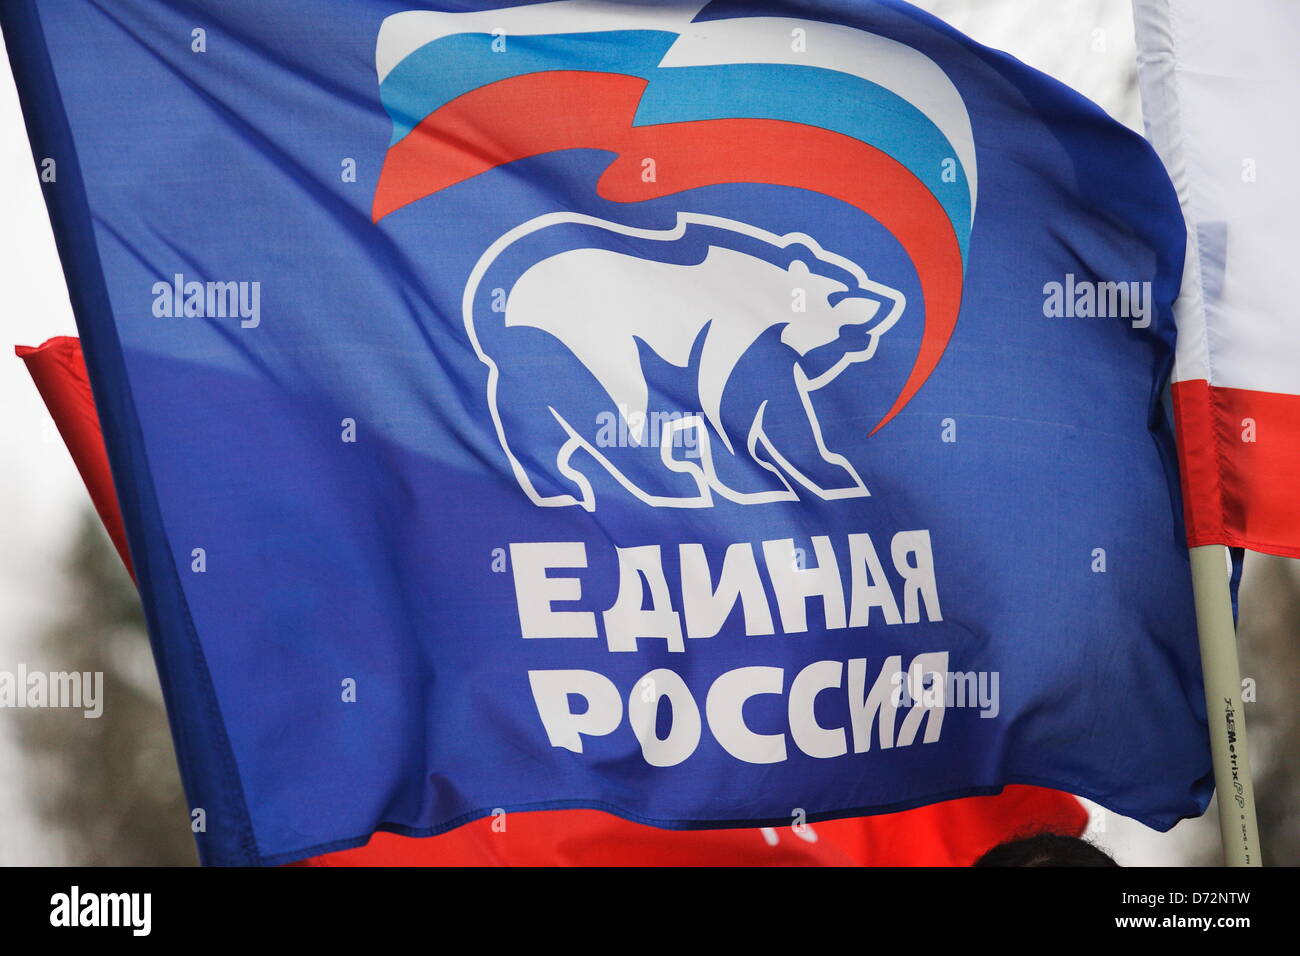 Braniewo, Poland 27th, April 2013 Over 200 bikers come to Poland from Kaliningrad Oblast in Russia to take part in the 68th anniversary of World War II end at the Soviet Army cemetery in Braniewo. Pictured: United Russia pro Russian government party flag. Credit: Michal Fludra/Alamy Live News Stock Photo